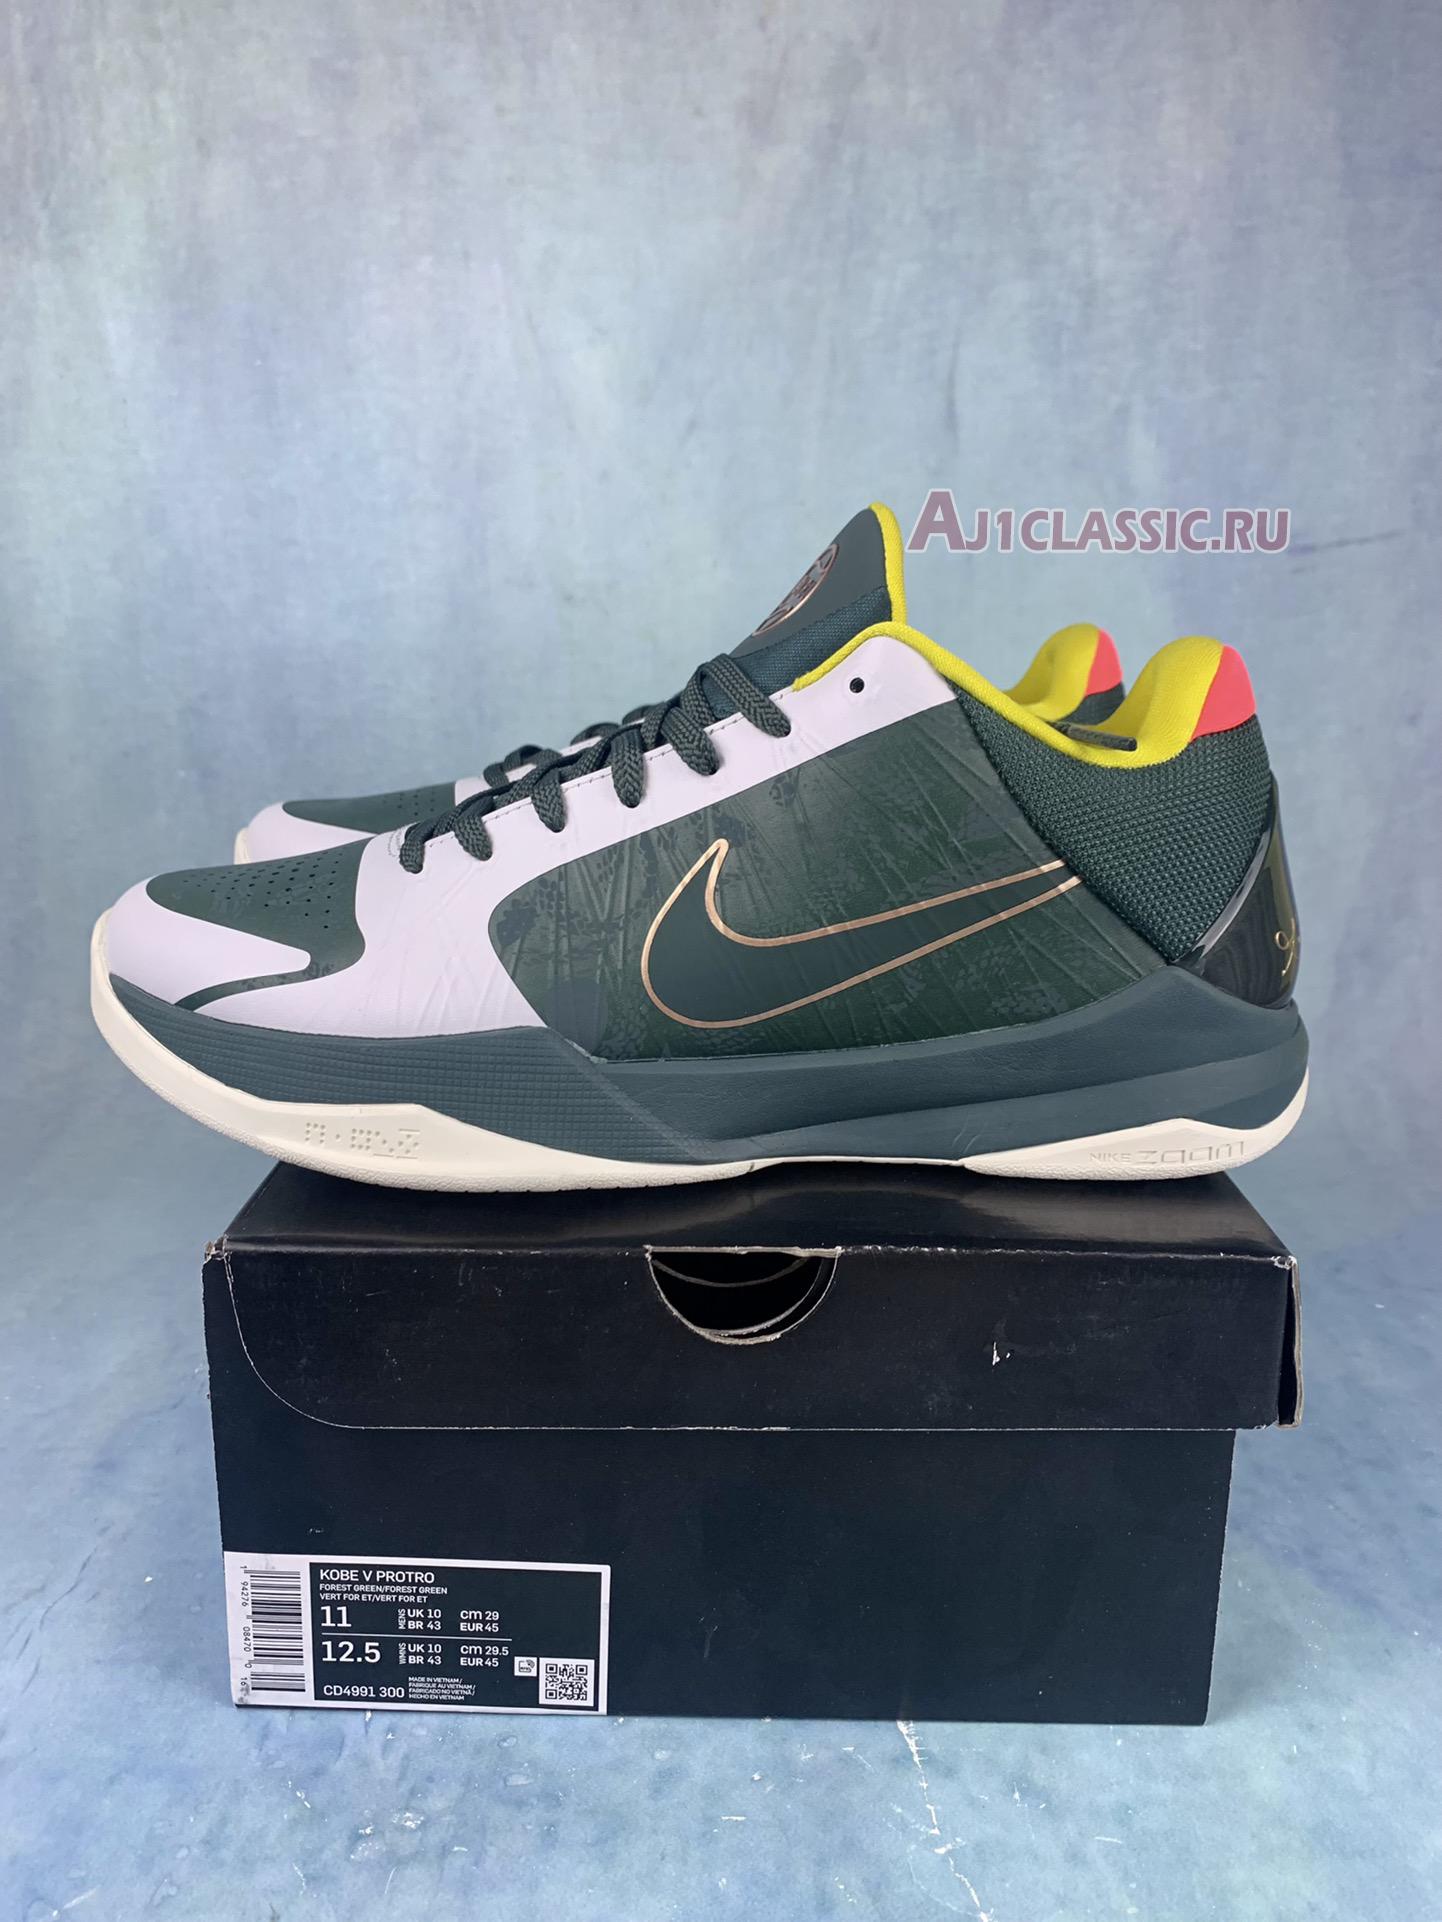 Nike Zoom Kobe 5 Protro EYBL CD4991-300 Forest Green/Metallic Red Bronze/Speed Yellow/Forest Green Sneakers